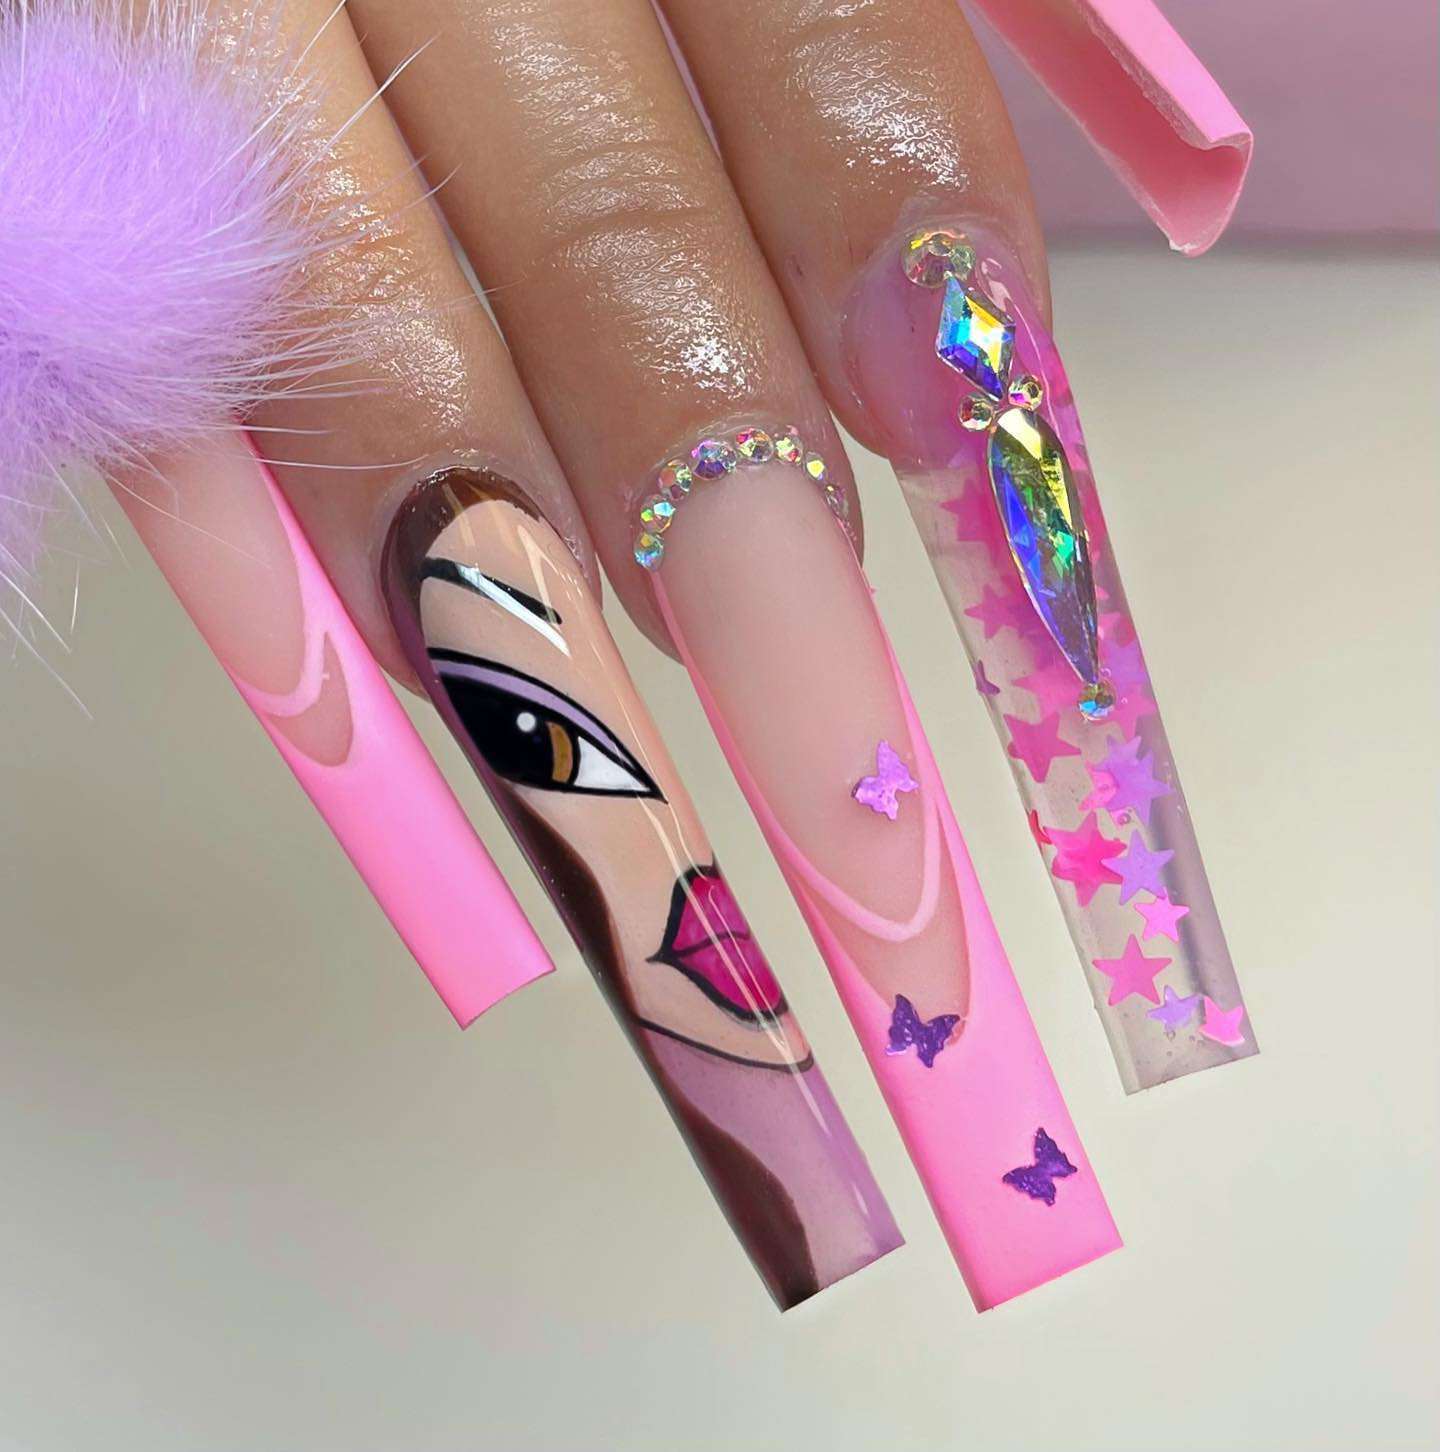 35 Nail Designs For 2022 You’ll Want To Try Immediately images 22